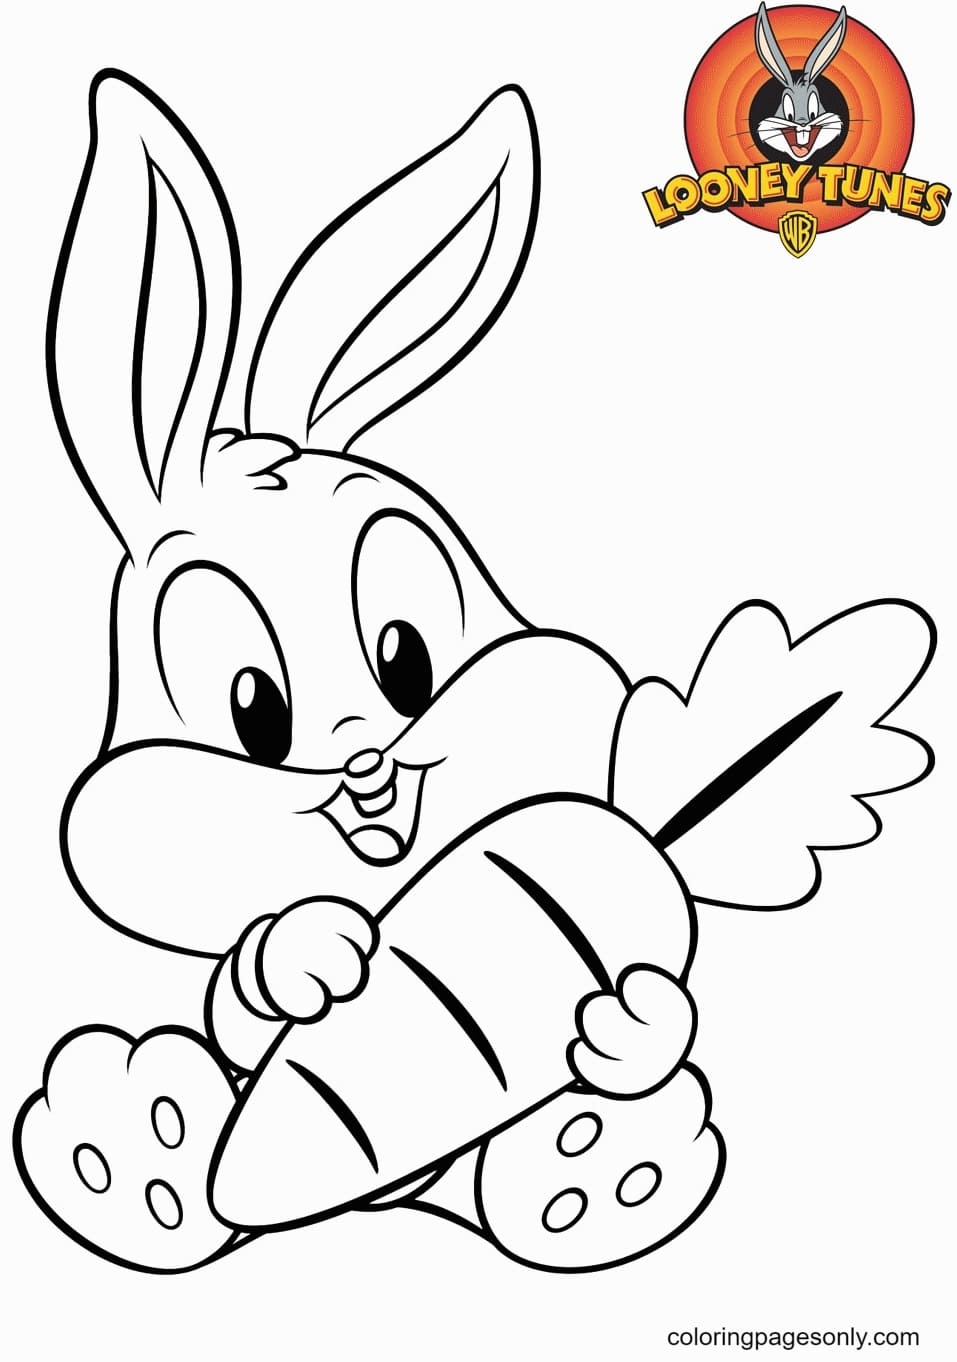 Cute Cartoon Bunnies Coloring Pages   Cute Bunnies Coloring Pages ...